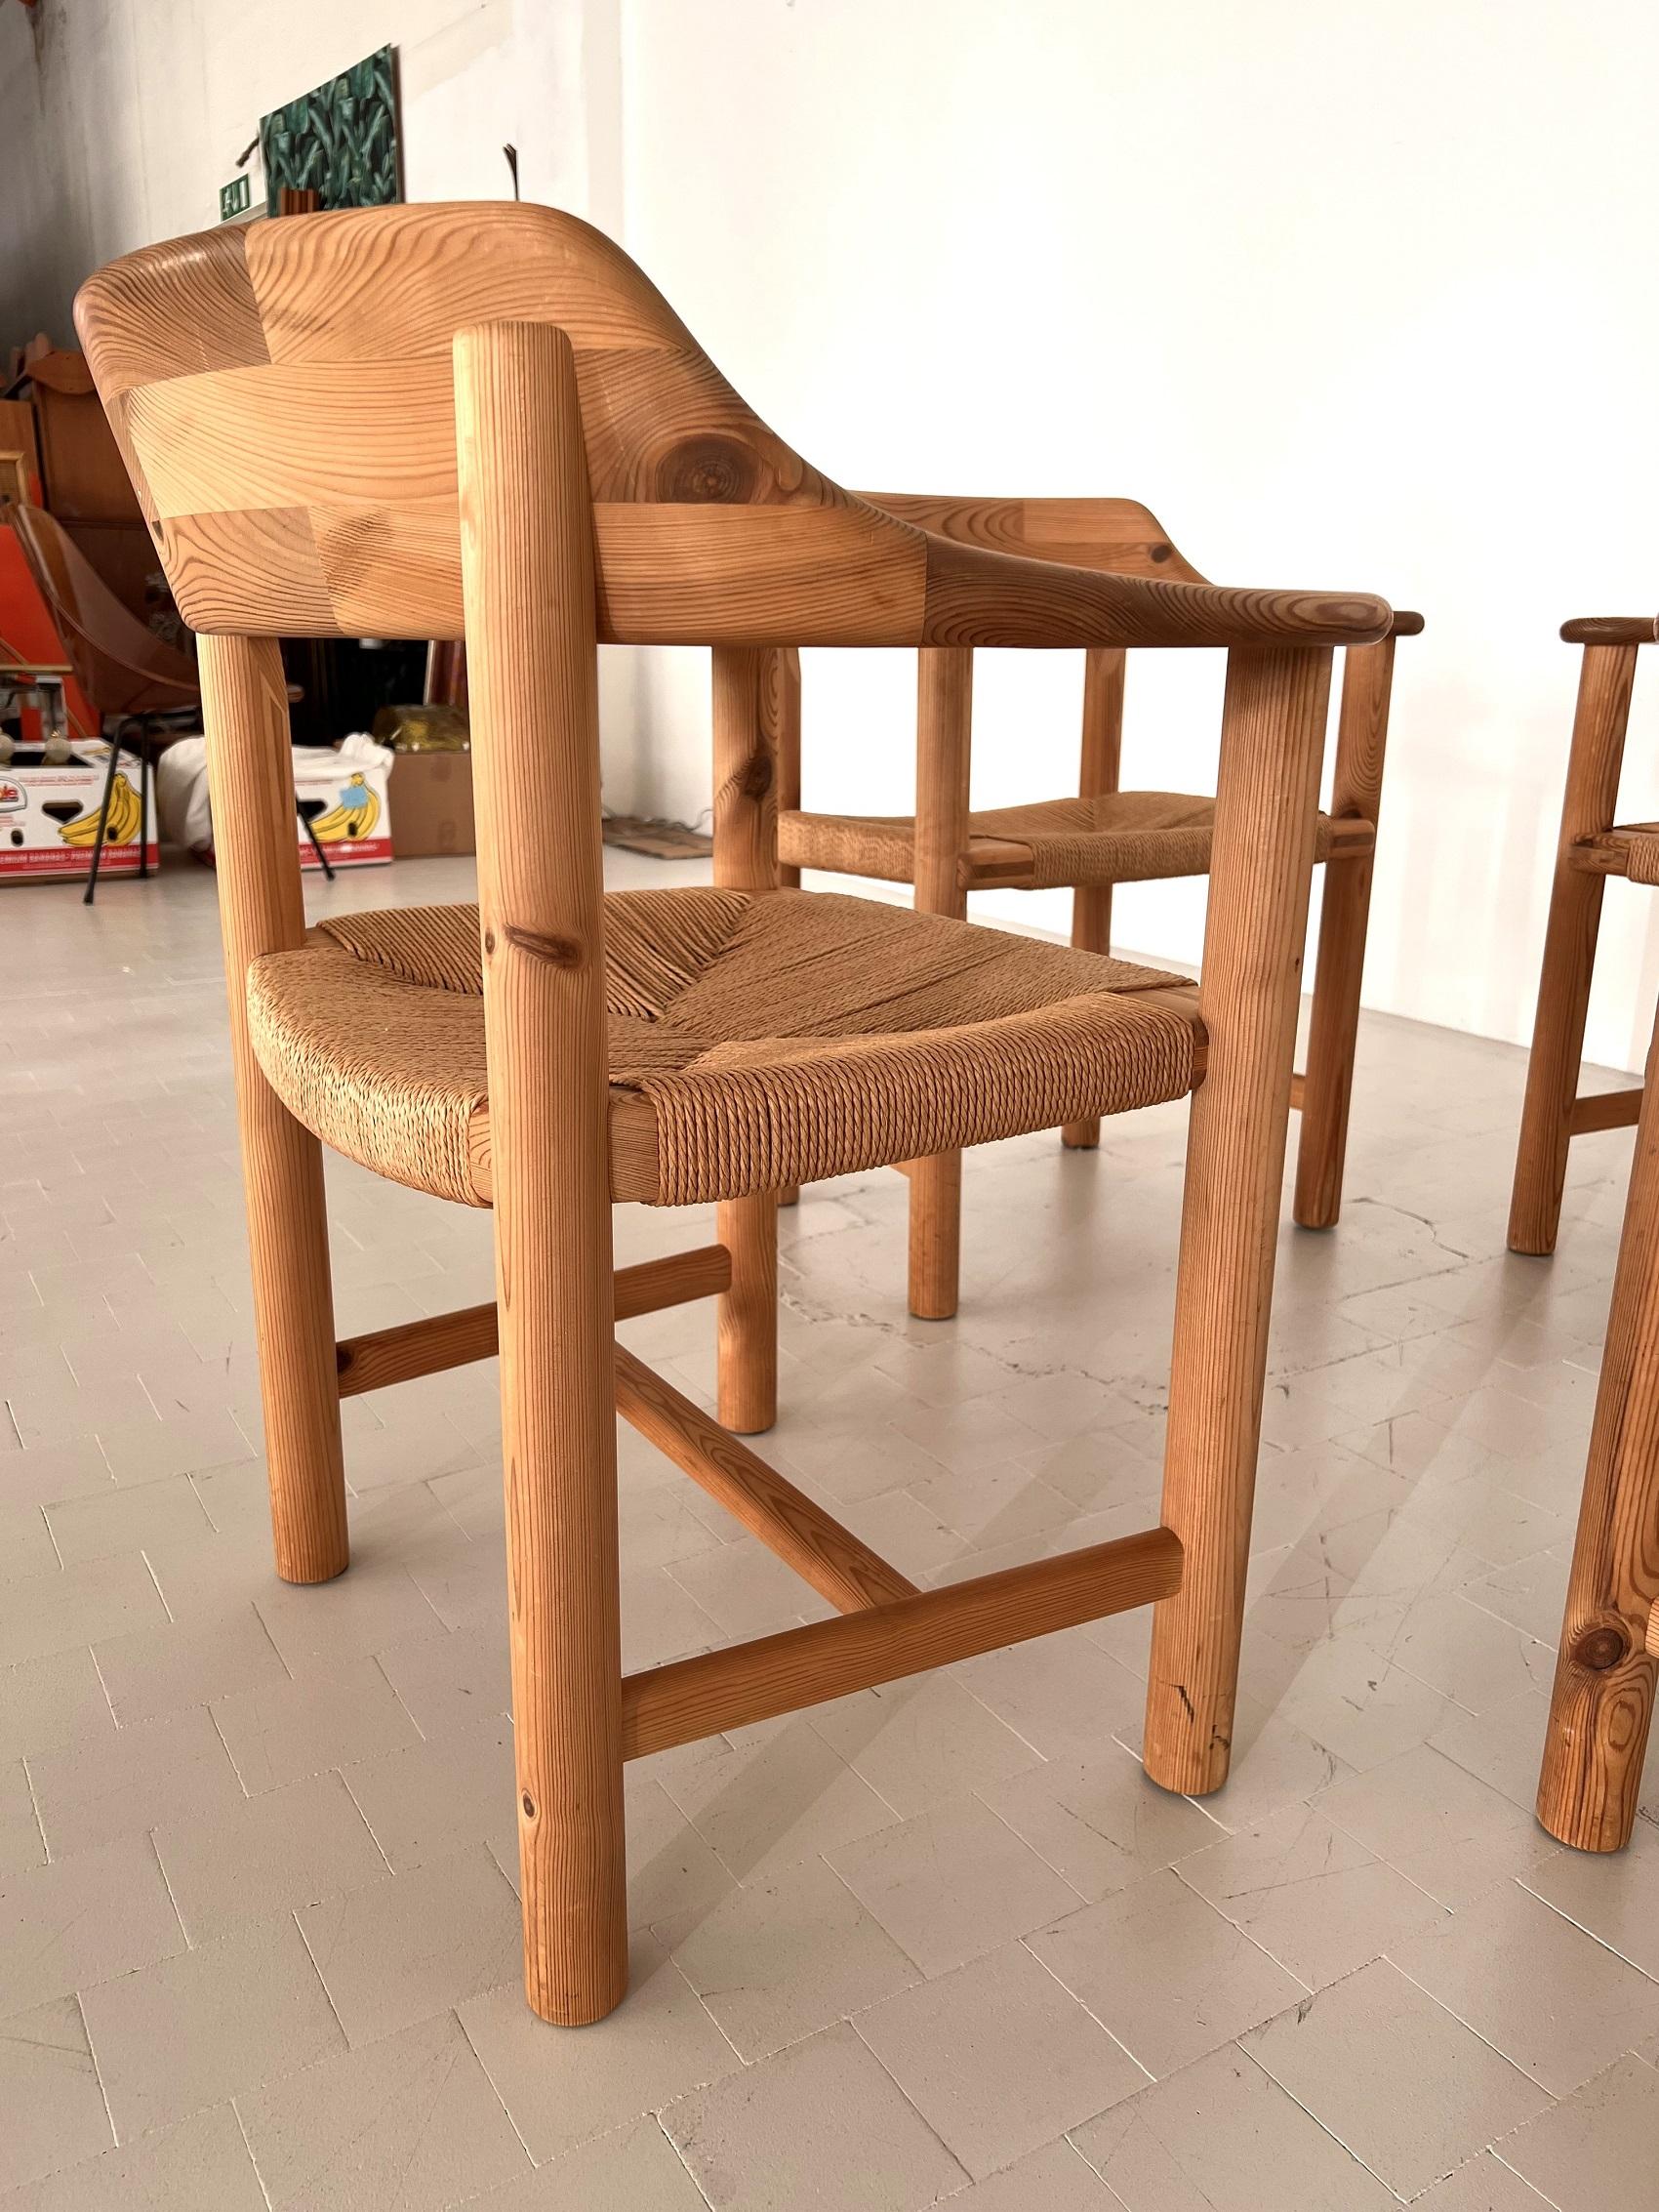 Rainer Daumiller Dining Chairs in Pine and Paper Cord, 1970s For Sale 5